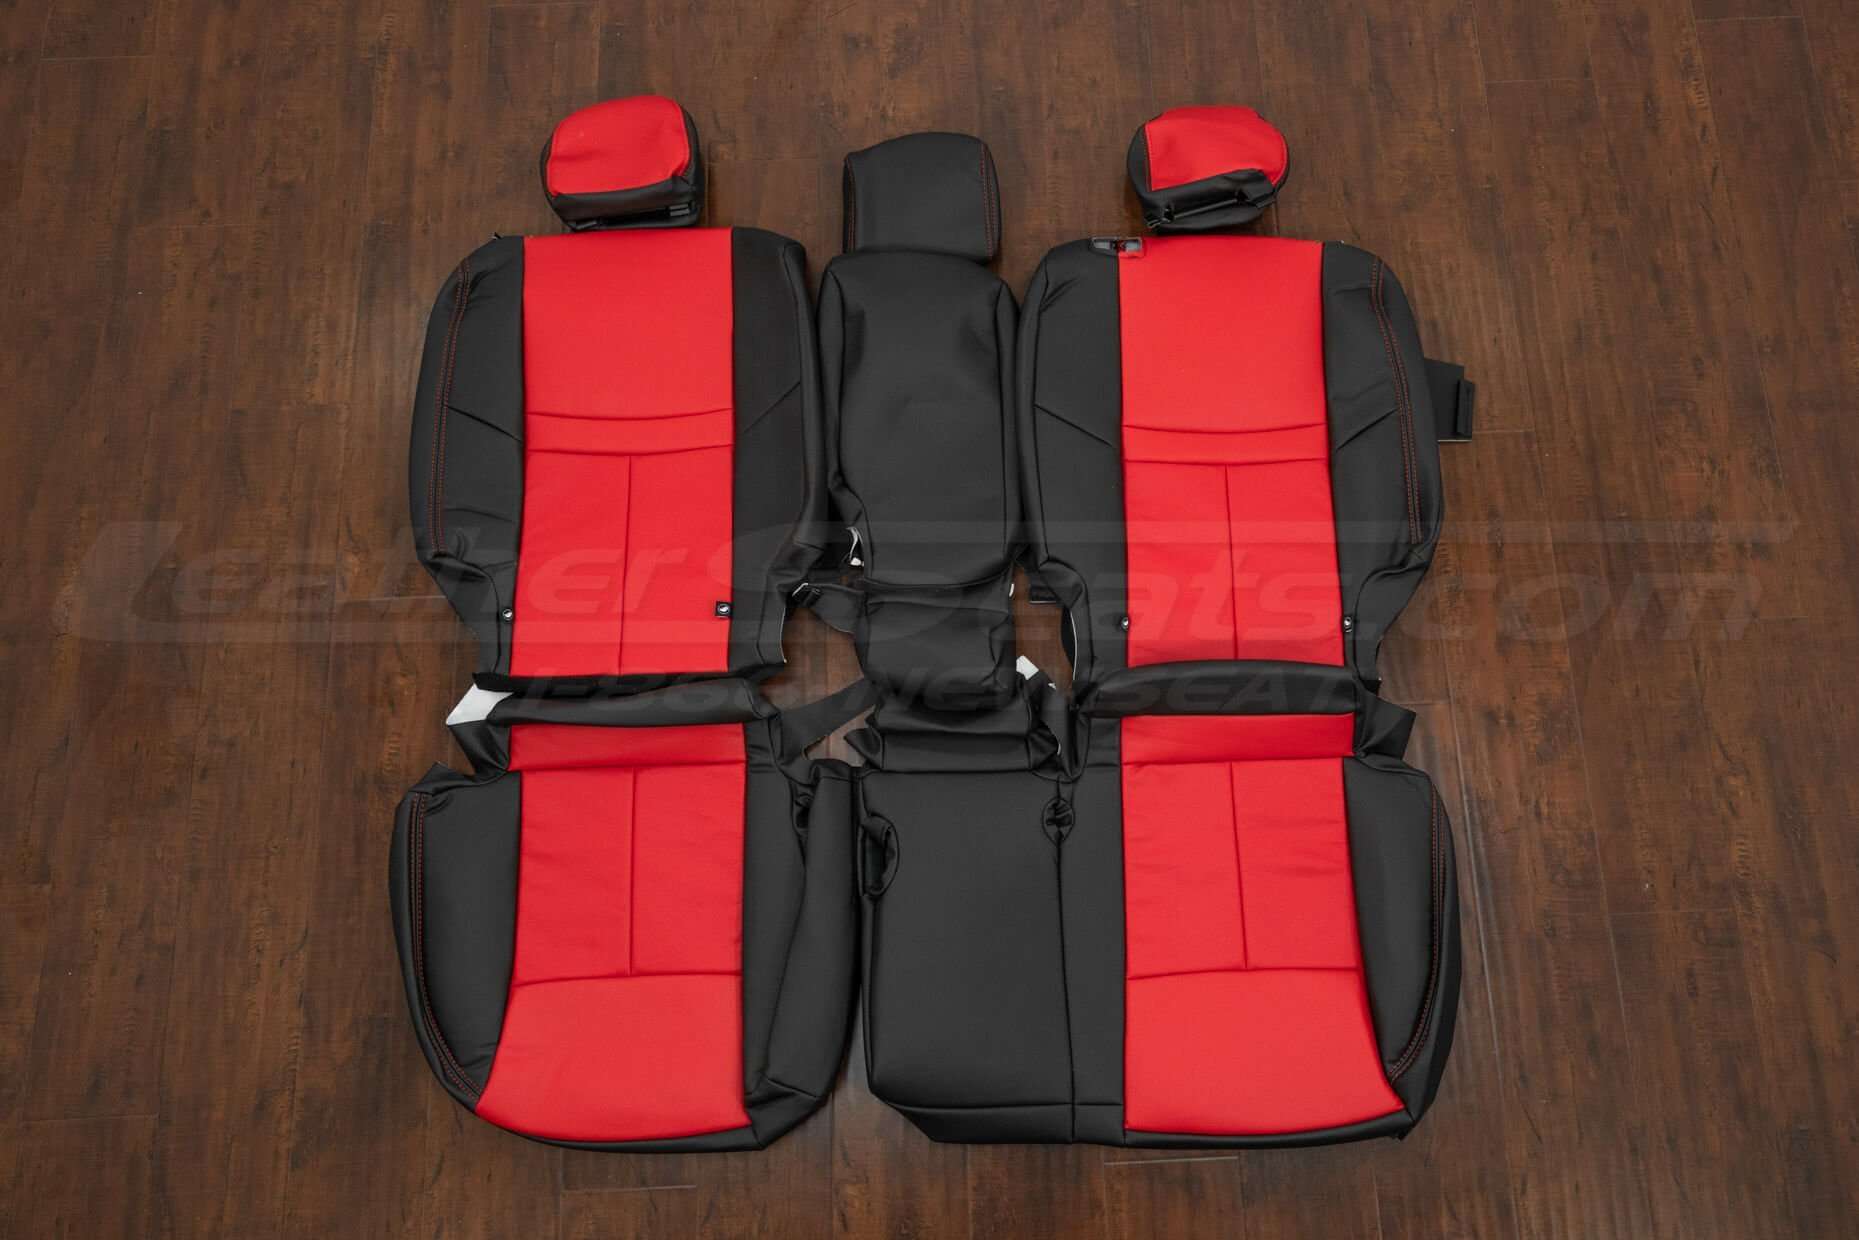 NissanRogue Leather Seat Interior Kit - Black/Bright Red - Rear seat upholstery w/ Armrest